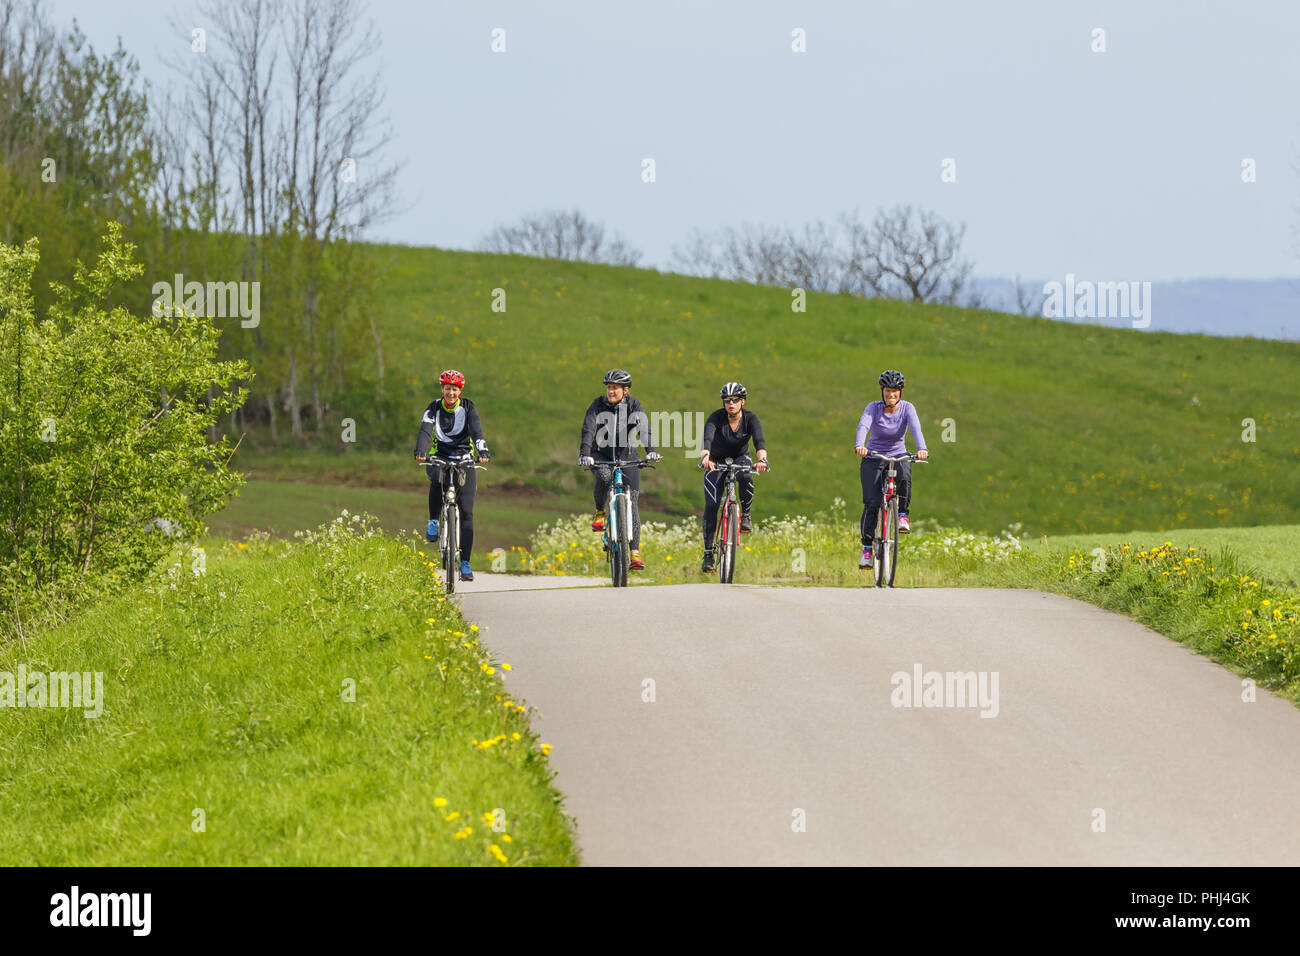 Four women riding a country road on a training trip Stock Photo